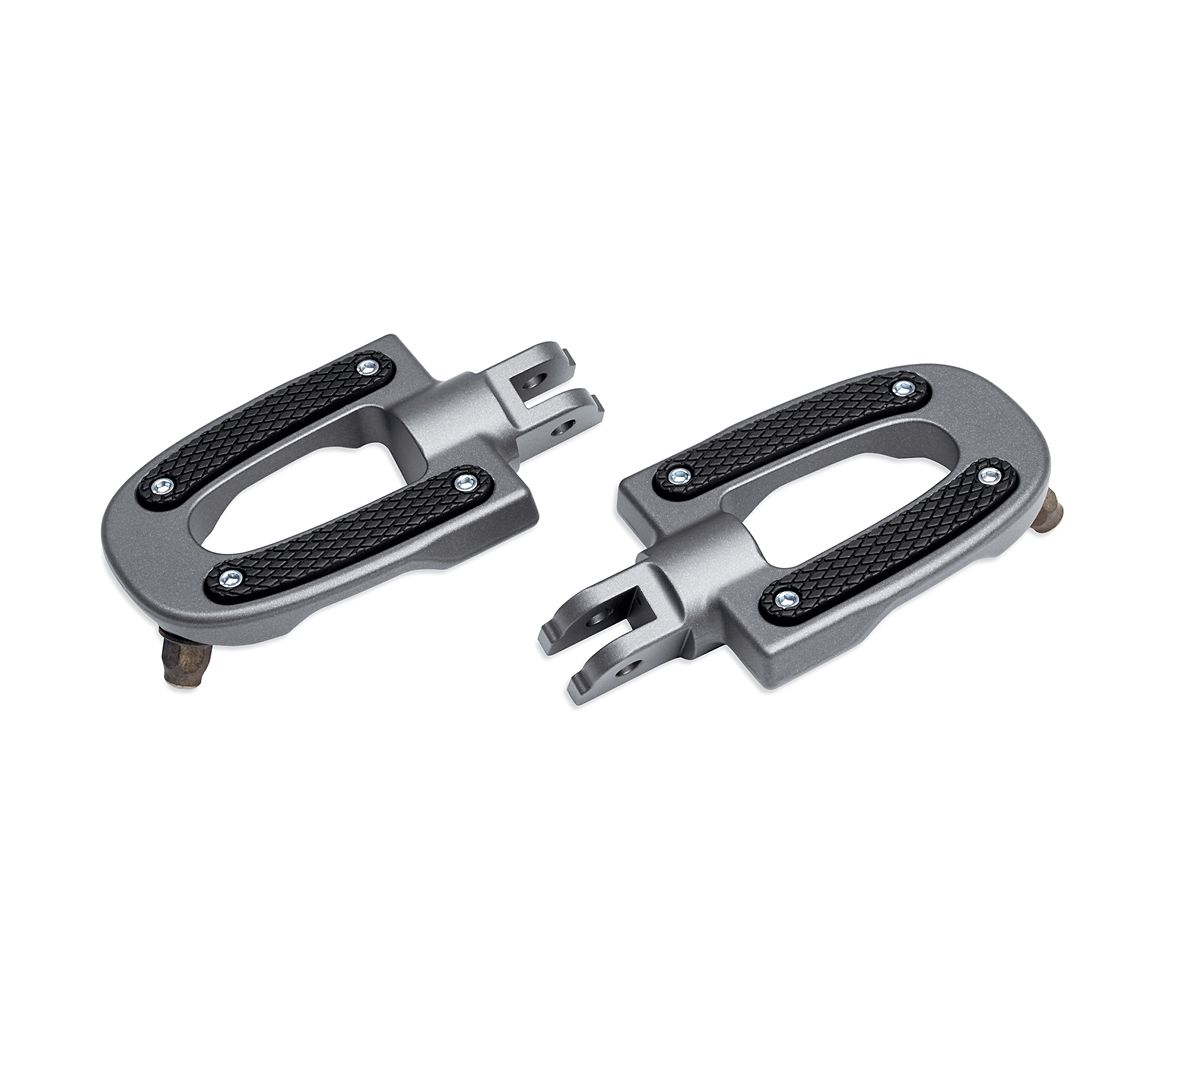 Harley-Davidson® Endgame Rider Footpegs - GRAPHITE - 50501641 -Softail.  Push your custom style to the edge. The Endgame™ collection is defined by its slotted design and high-tech, industrial look.